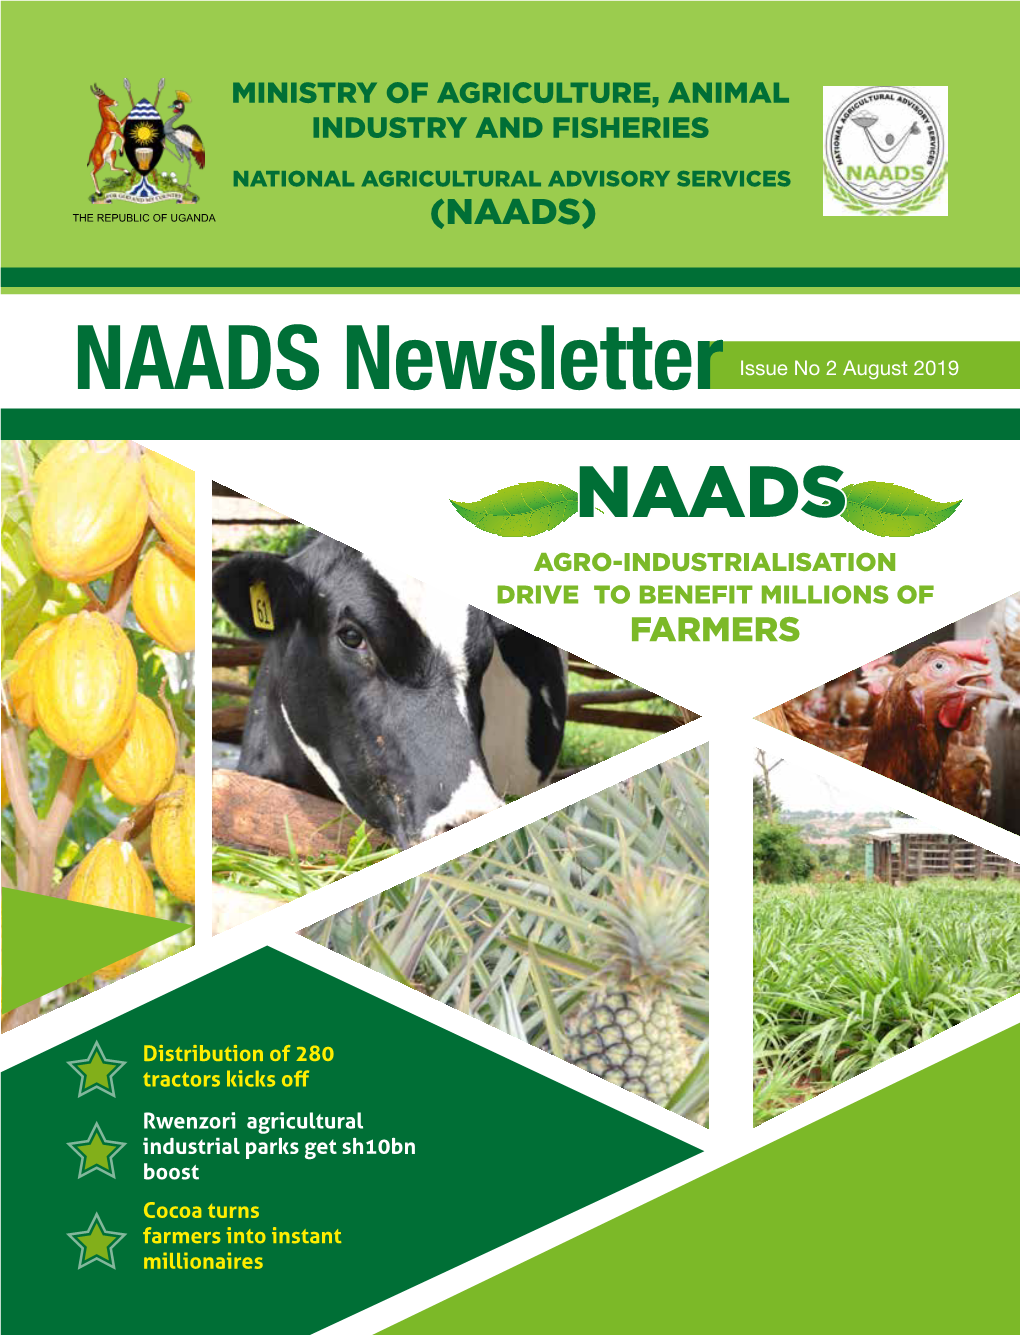 NAADS Newsletter Issue No 2 August 2019 NAADS AGRO-INDUSTRIALISATION DRIVE to BENEFIT MILLIONS of FARMERS